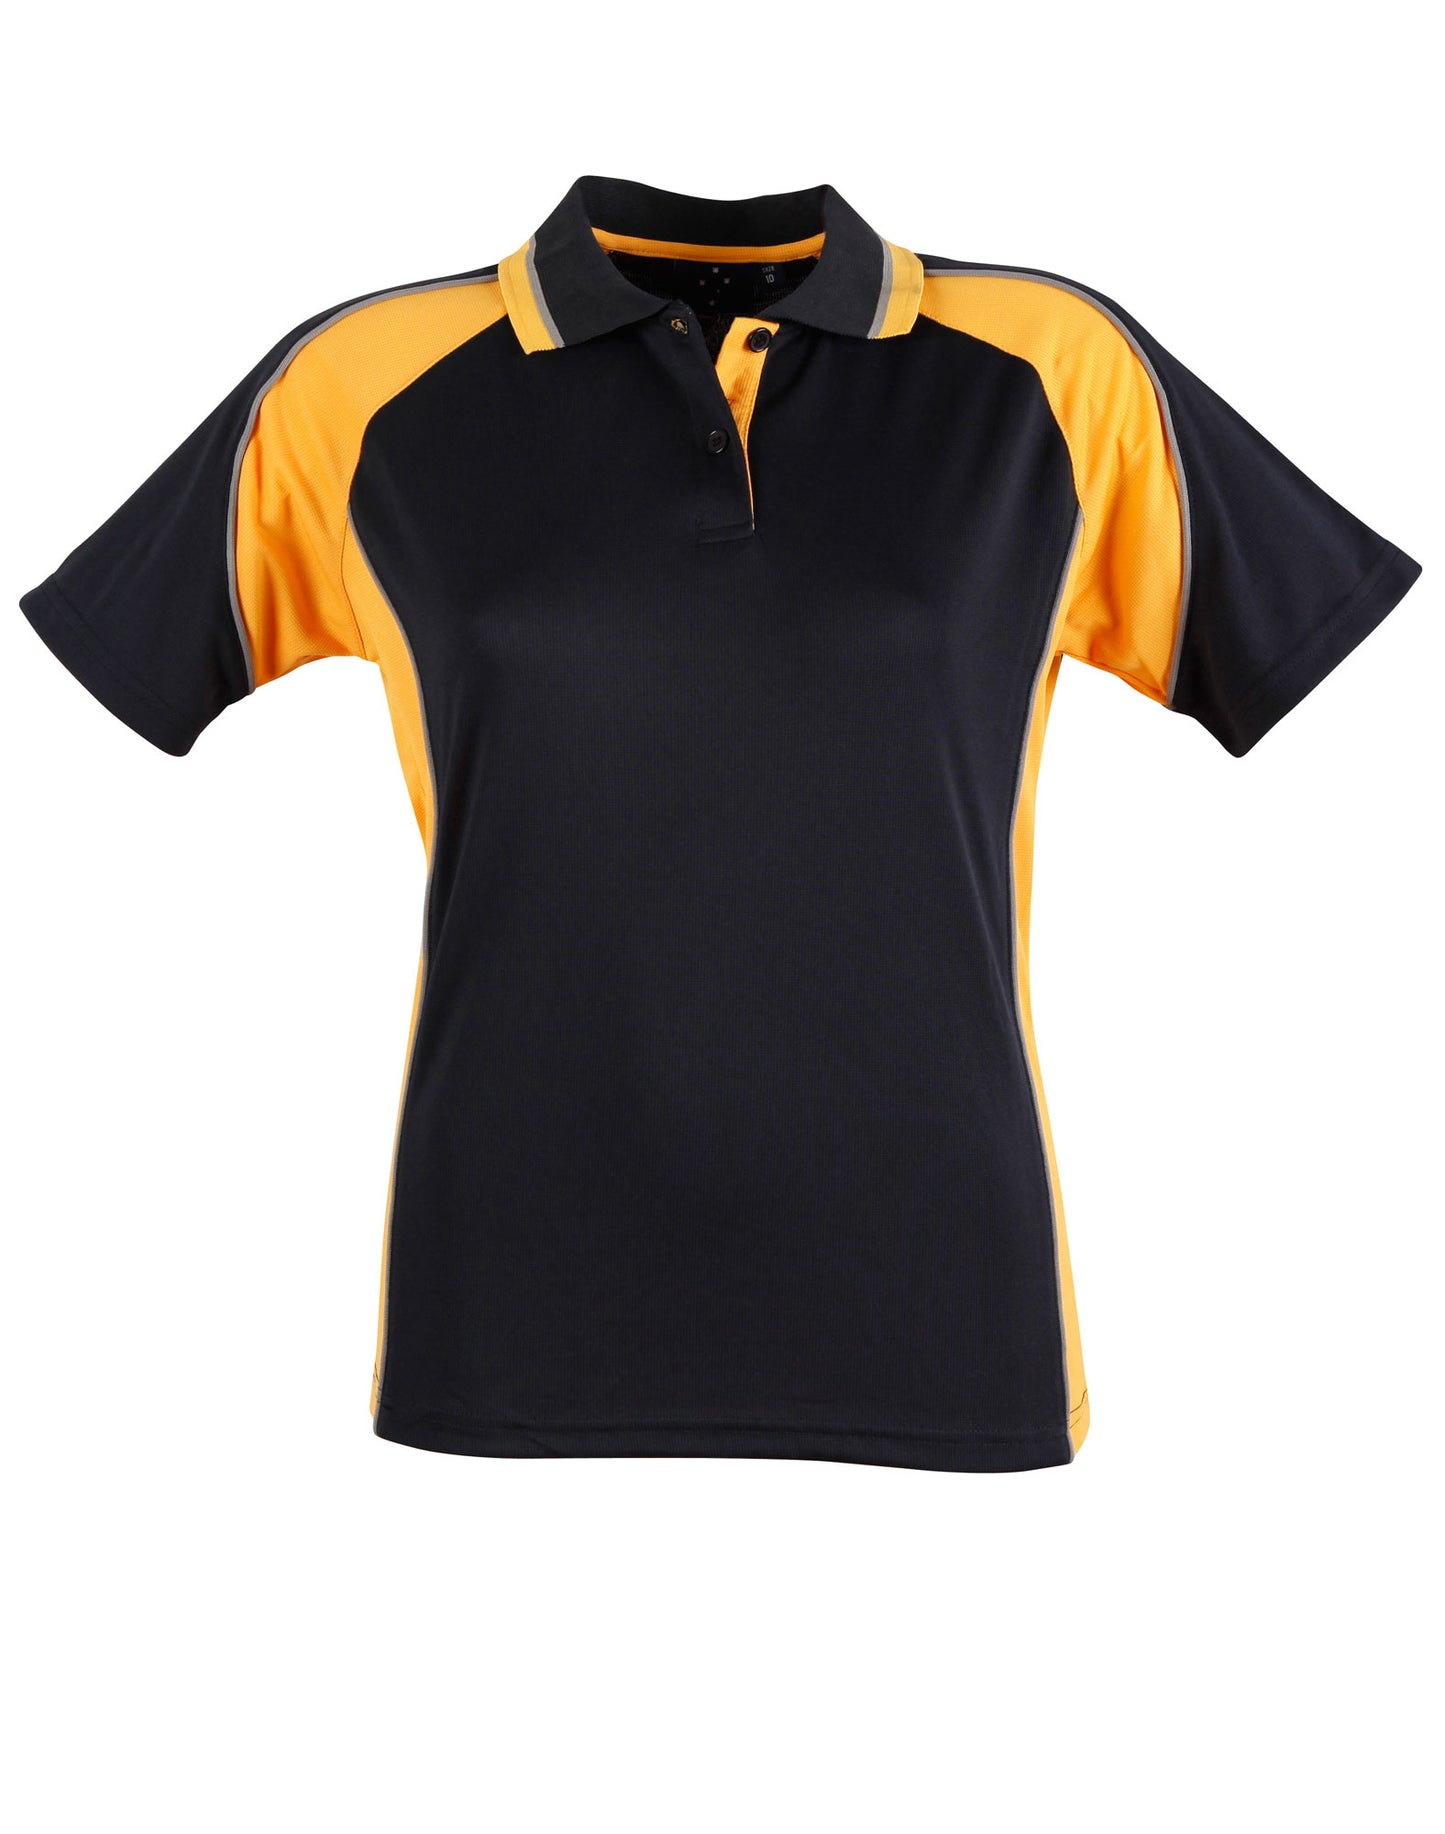 Mascot Ladies Polo Shirt - made by AIW